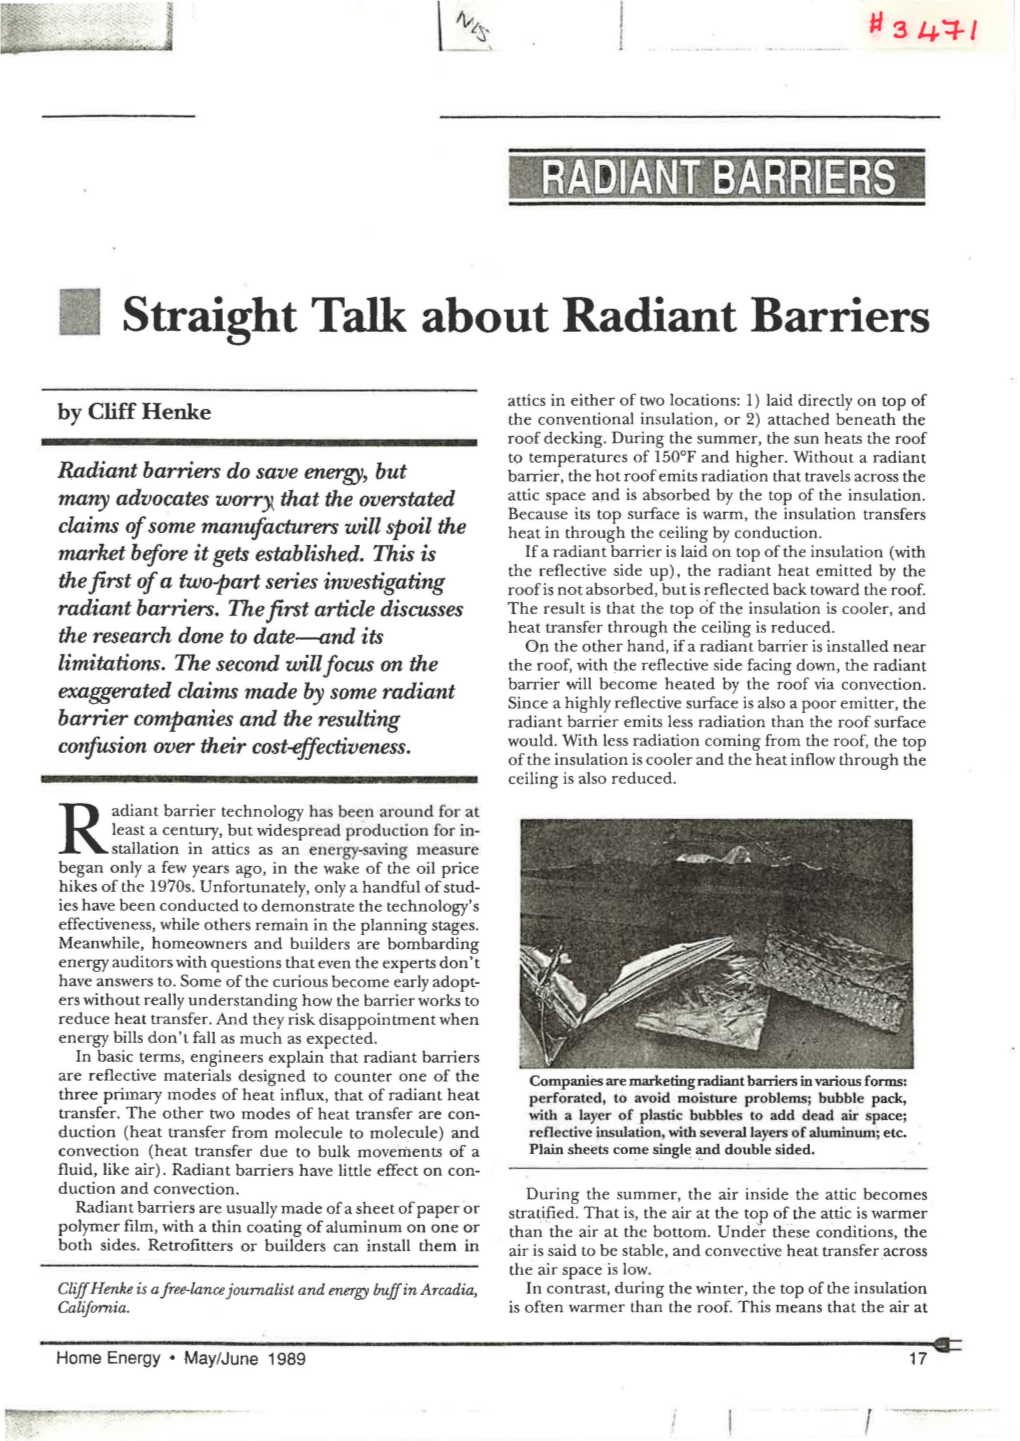 Straight Talk About Radiant Barriers